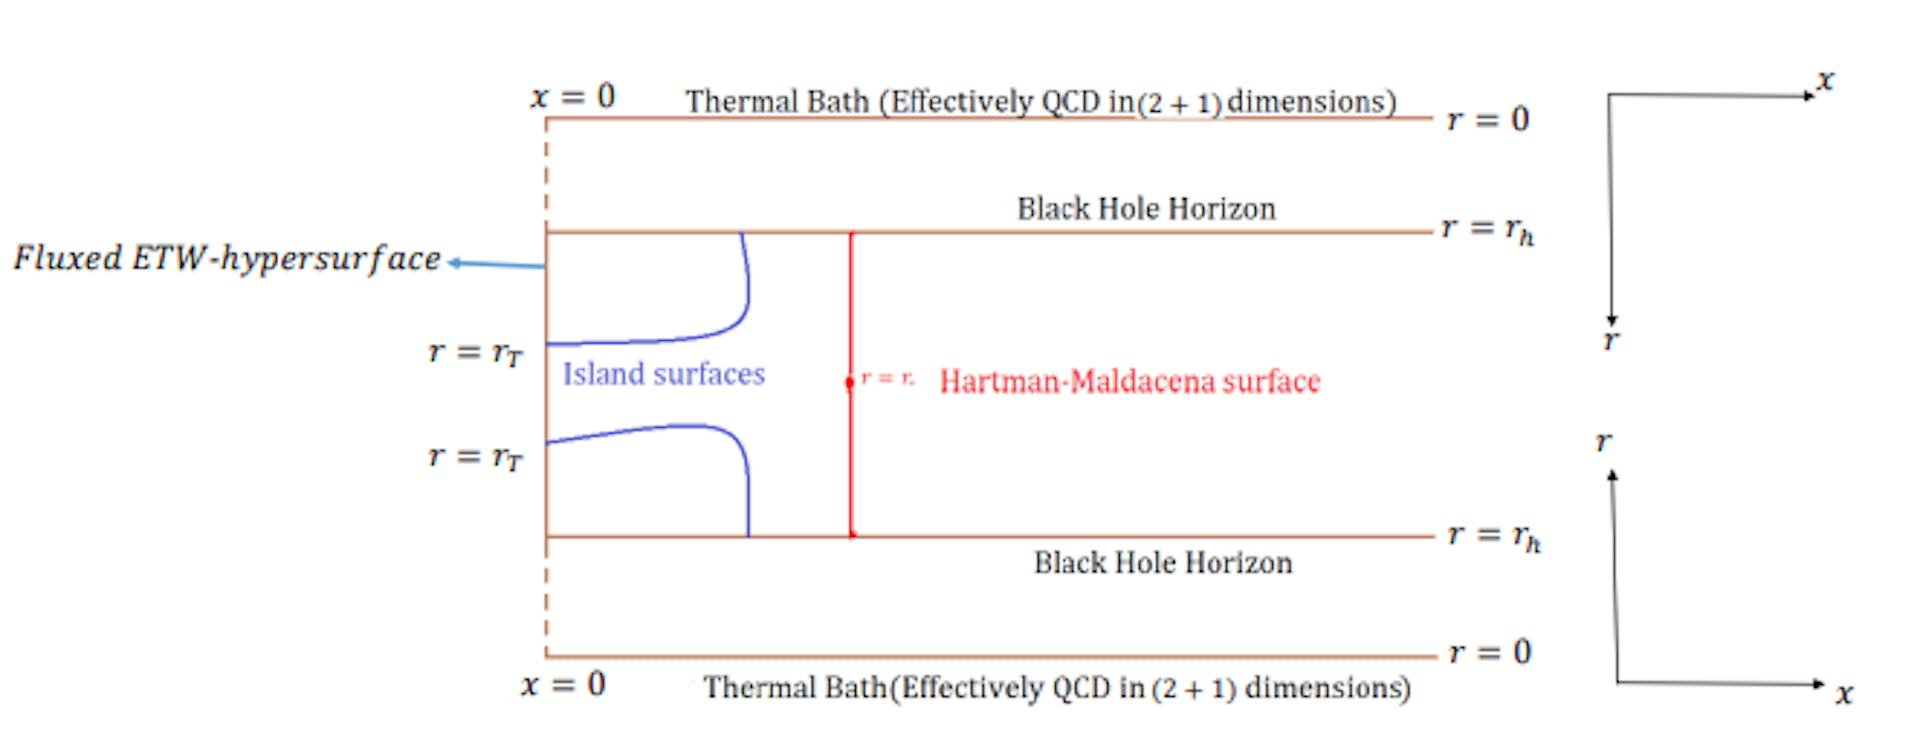 Figure 7.1: Doubly holographic setup in M-theory dual. ETW-black “brane” is coupled the thermal bath (at the tip of seven-fold of G2-structure which is a cone over a warped non-Kähler resolved conifold), where the Hawking radiation is collected, which effectively is thermal QCD2+1 along x1,2,3 after Wick-rotation along x 3 at r = 0. Blue curves correspond to the island surfaces and red curve corresponds to the Hartman-Maldacena-like surface.